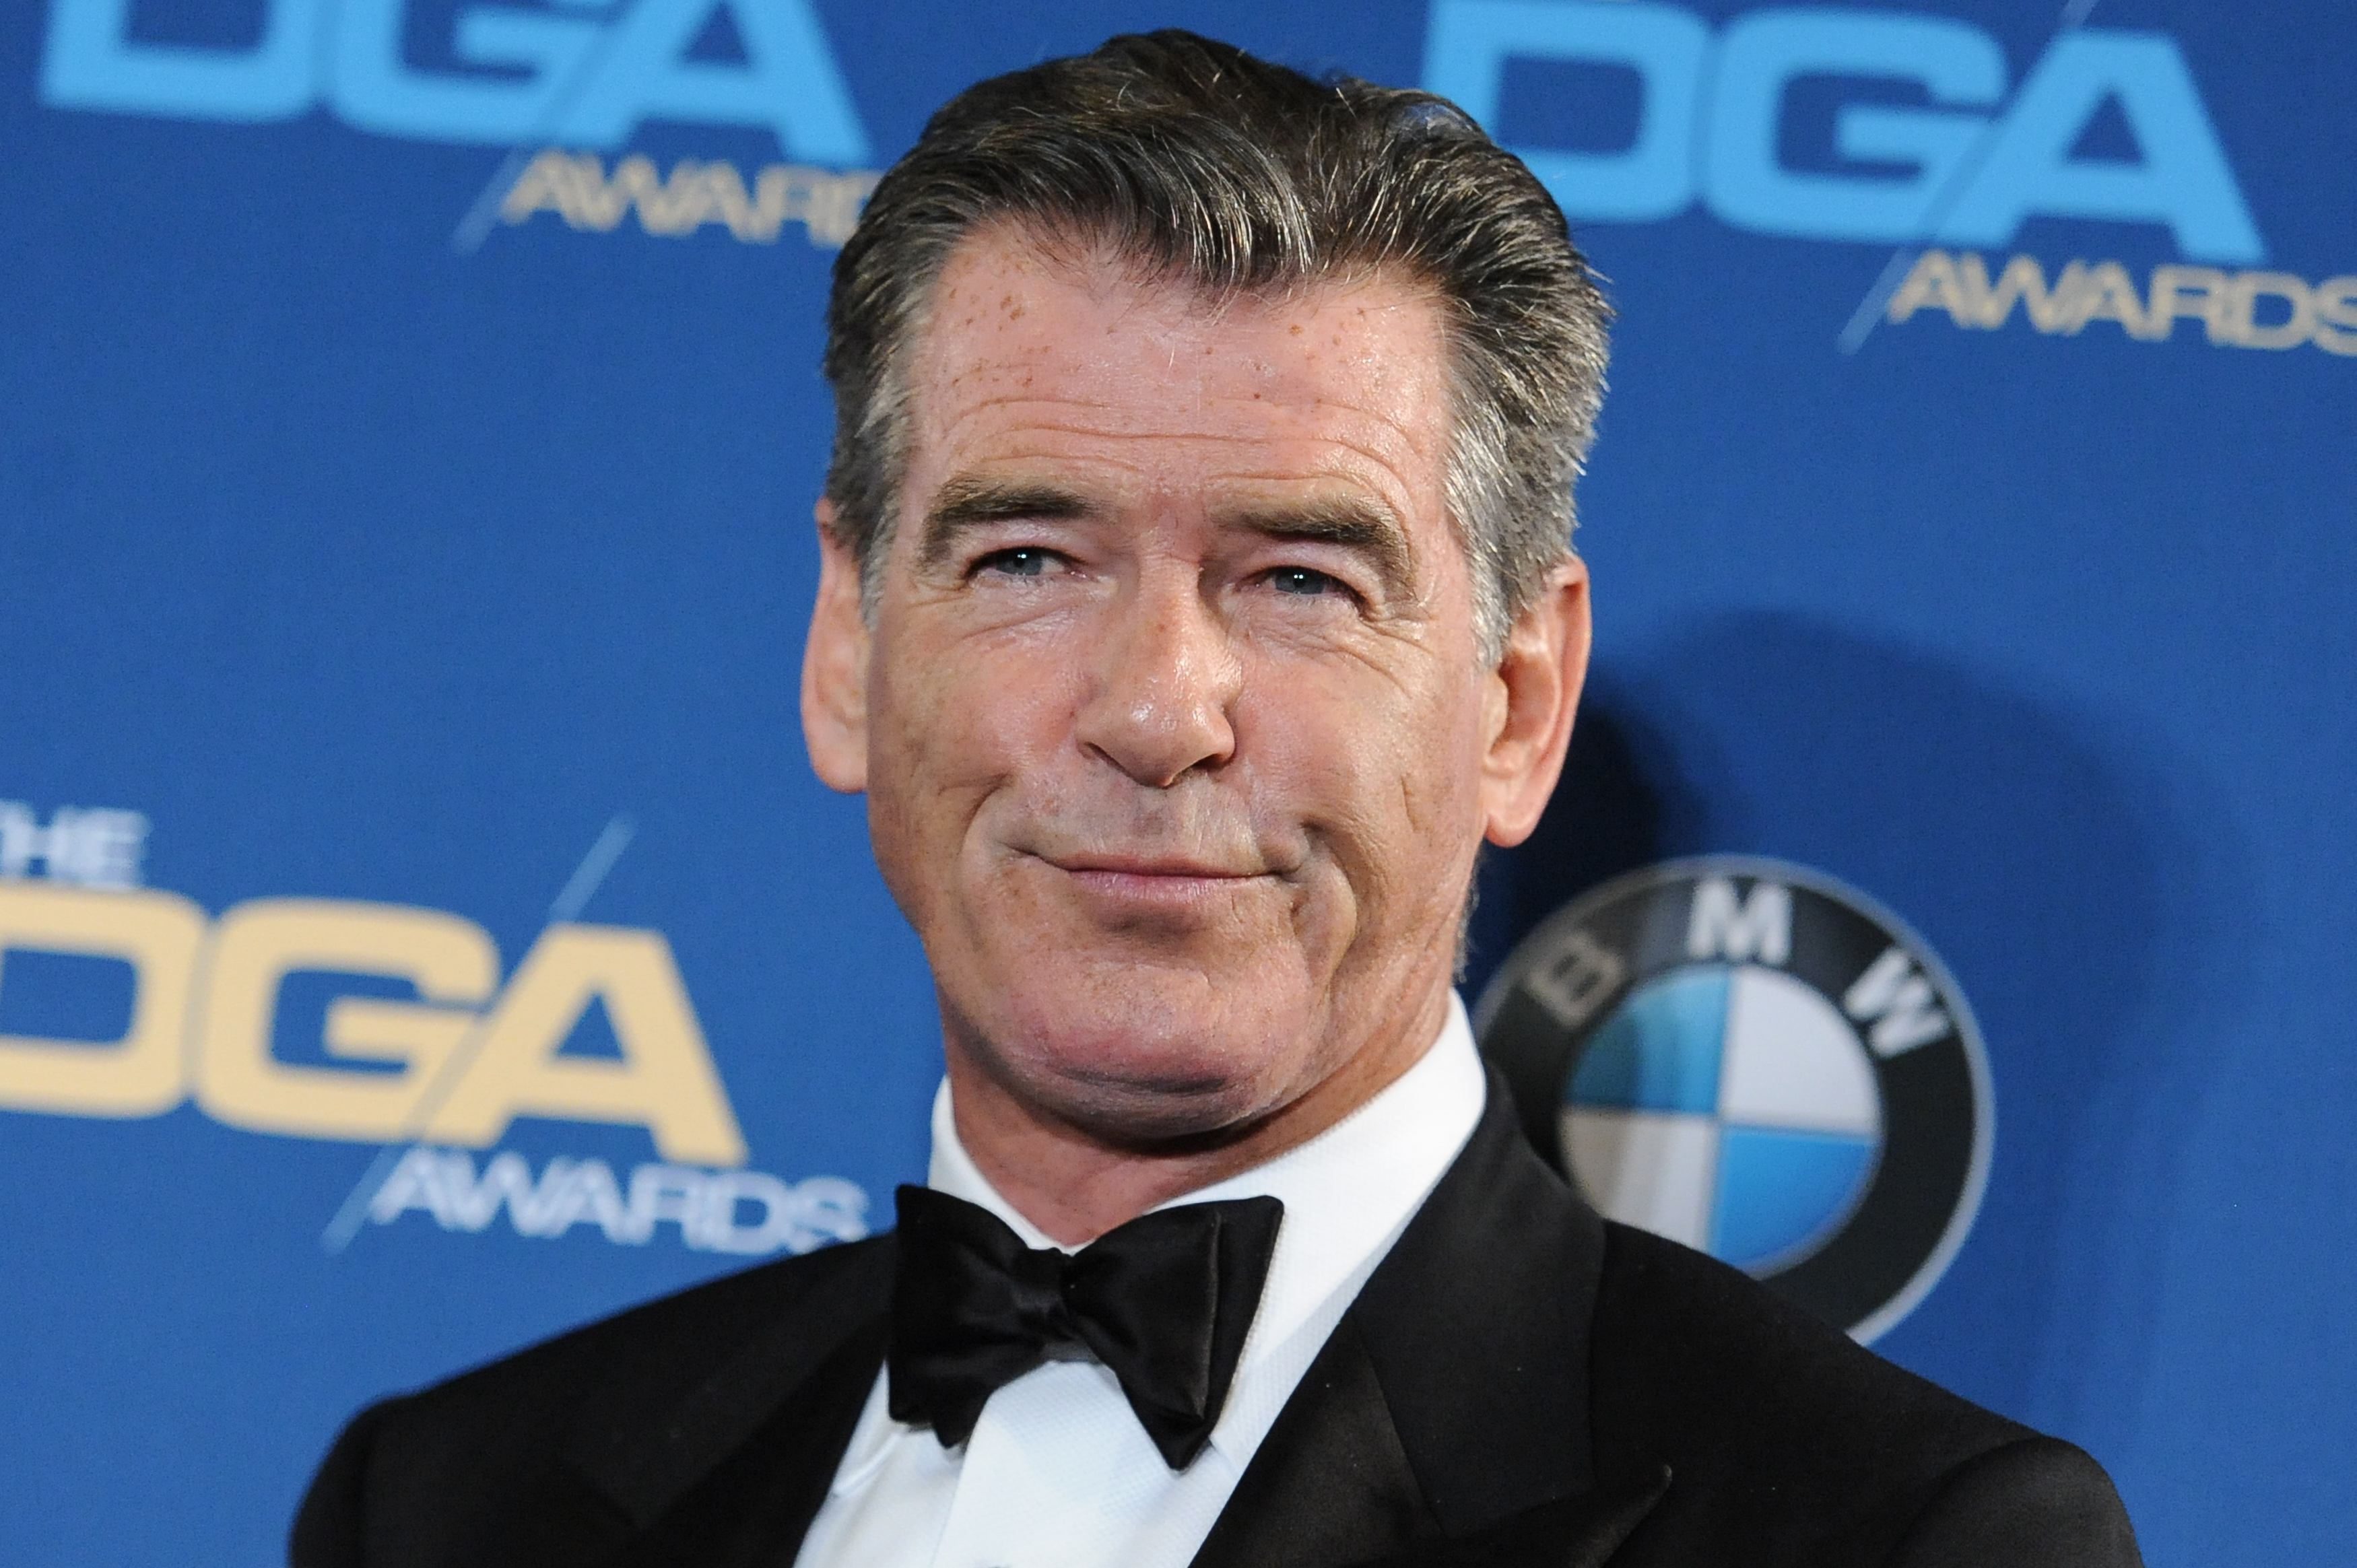 Pierce Brosnan attends the Press Room at the 67th Annual DGA Awards, in Los Angeles, Feb. 7, 2015. (Richard Shotwell/Invision—AP)